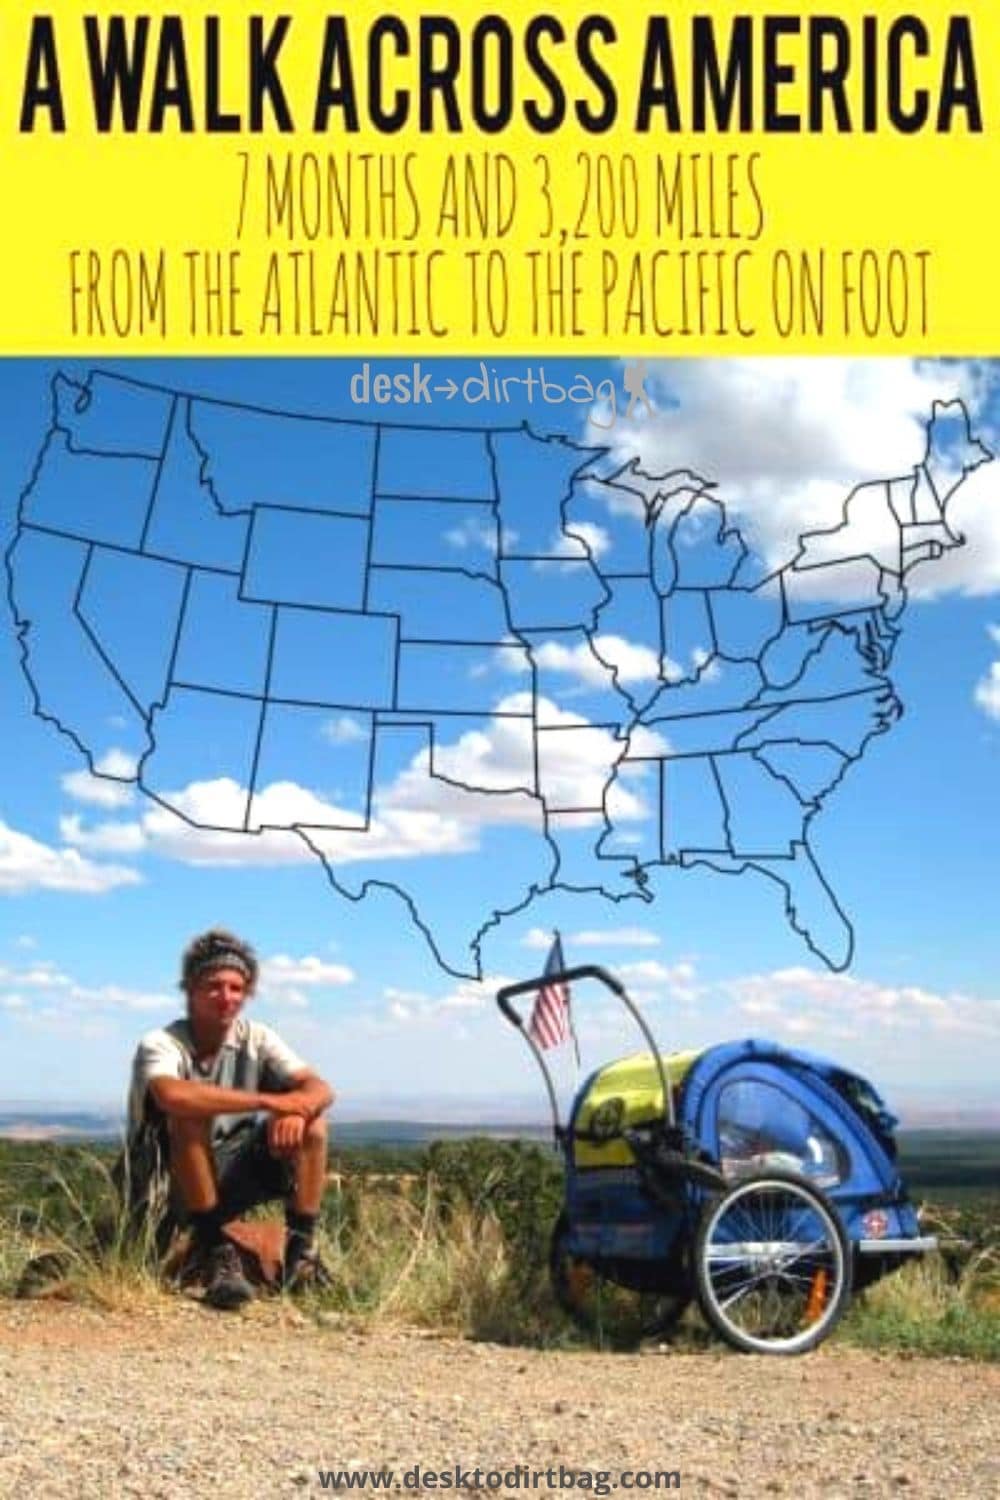 How to Walk Across America Meet Nate Damm and His Life on Foot